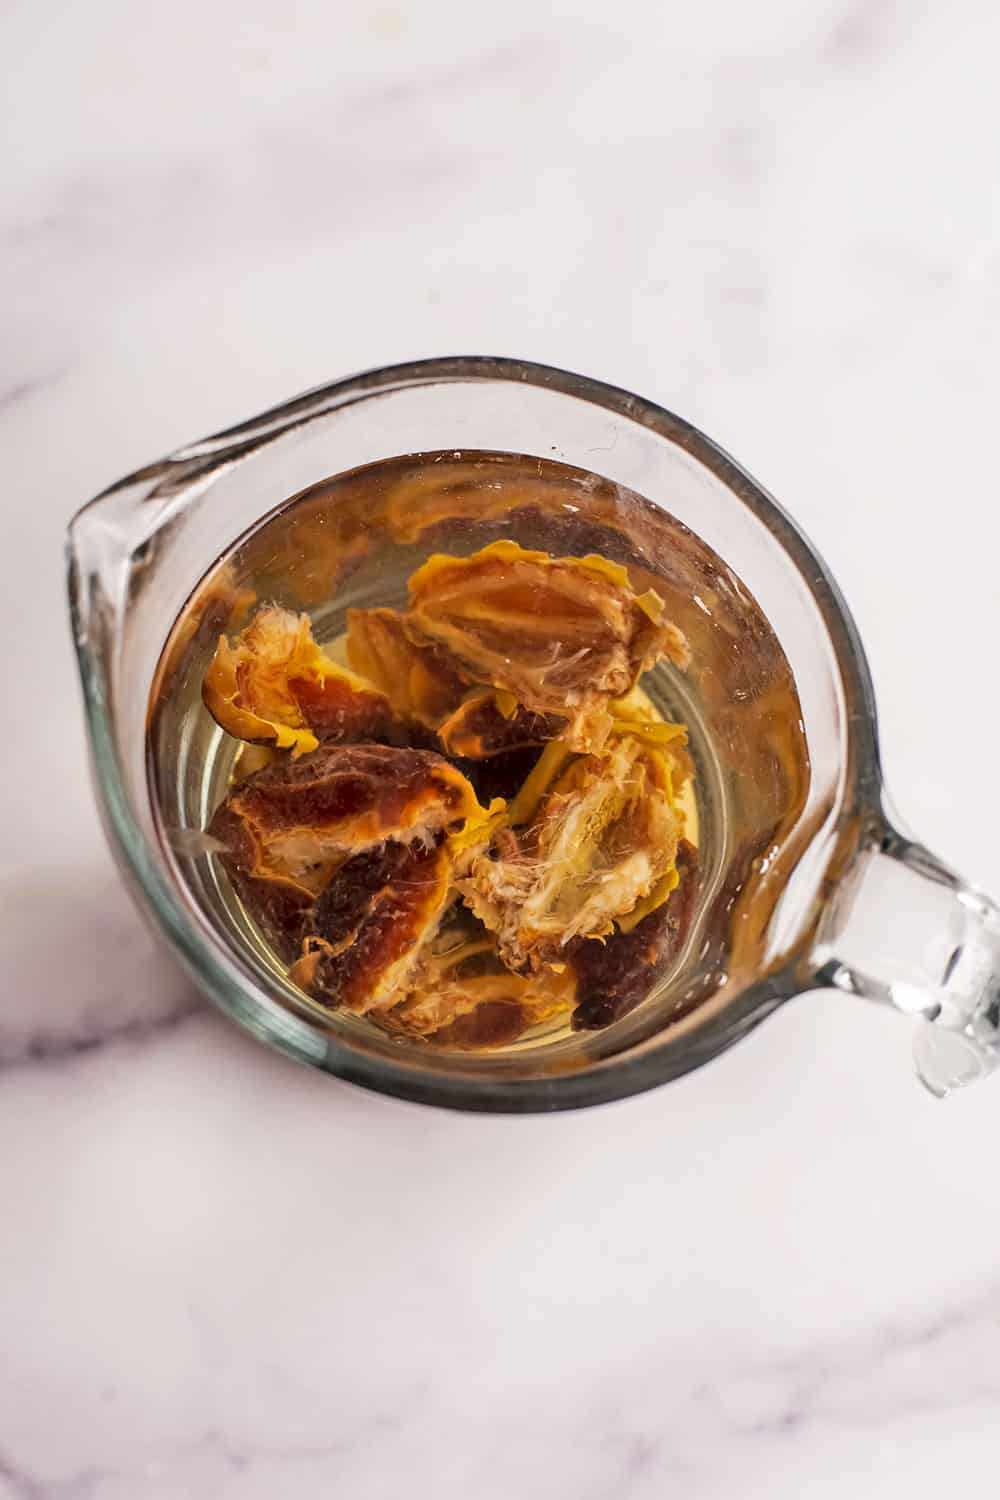 Pitted dates soaked in hot water in glass measuring cup.